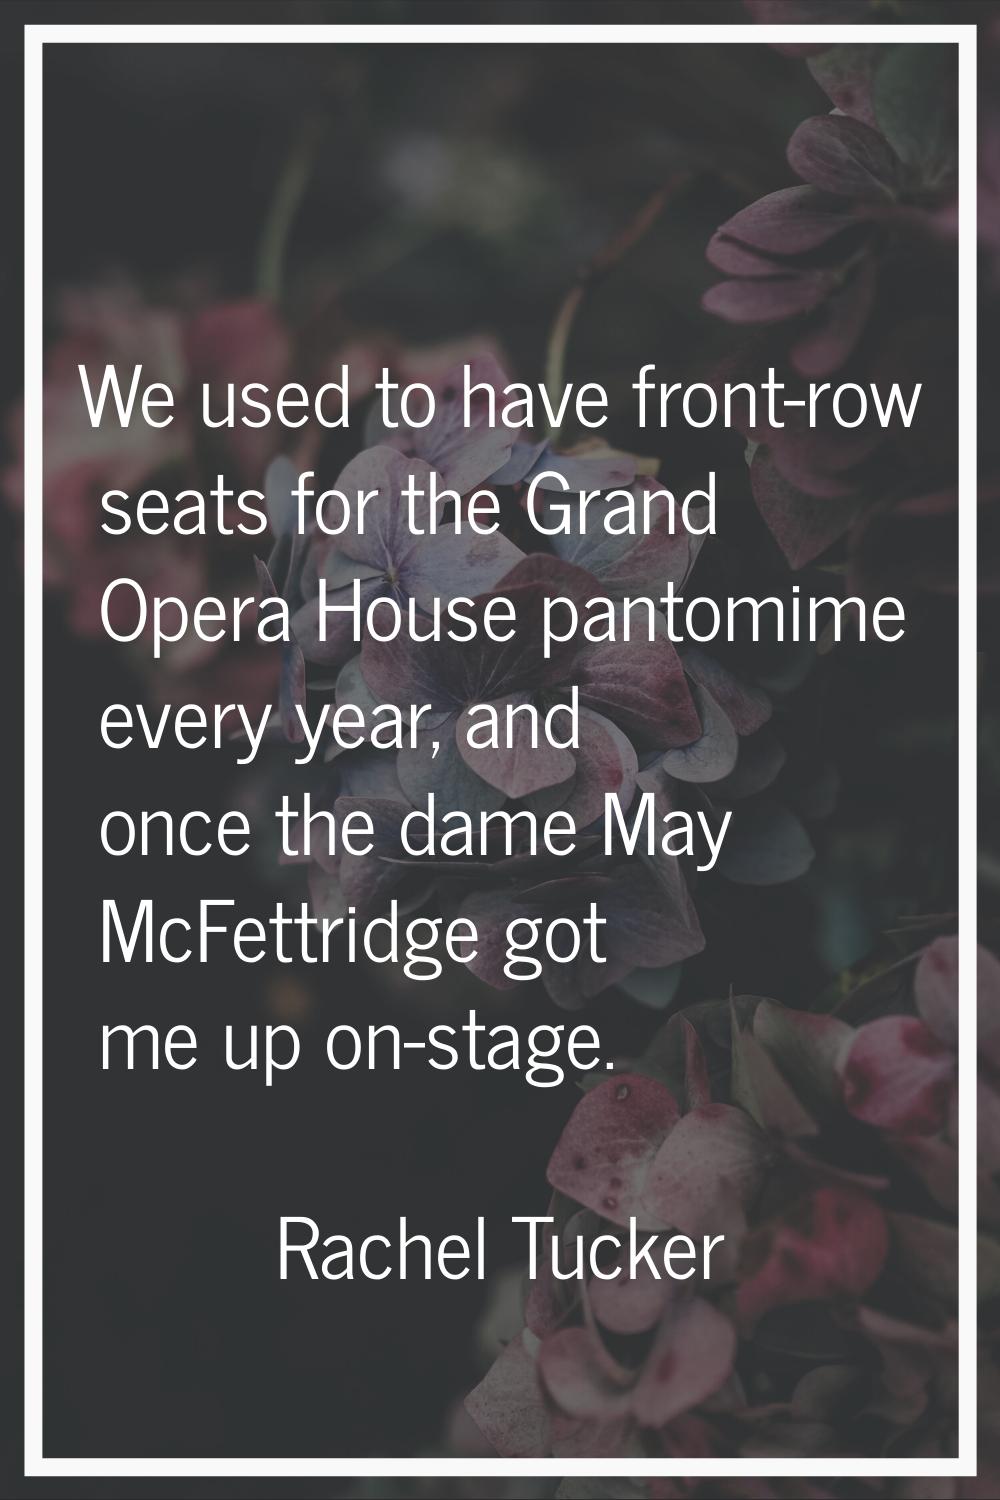 We used to have front-row seats for the Grand Opera House pantomime every year, and once the dame M